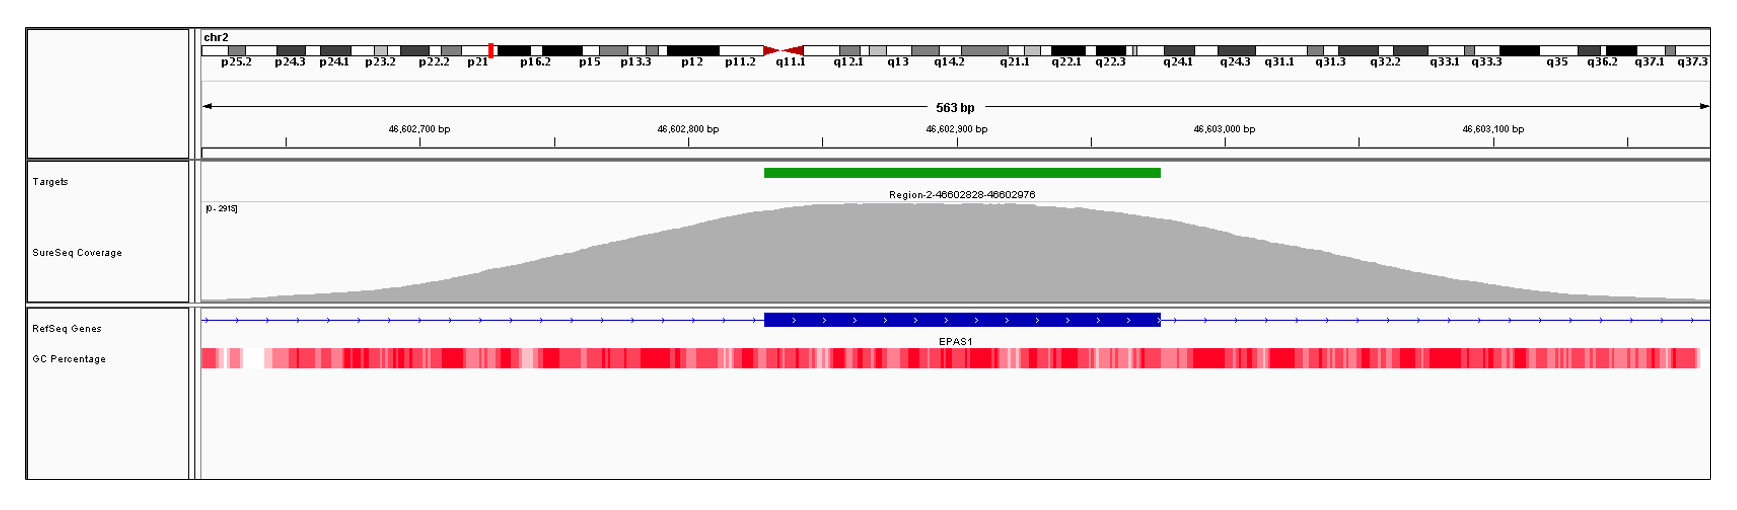 EPAS1 Exon 8 (hg19 chr2:46602829-46602976). Depth of coverage per base (grey). Targeted region (green). Gene coding region as defined by RefSeq (blue). GC percentage (red). Image